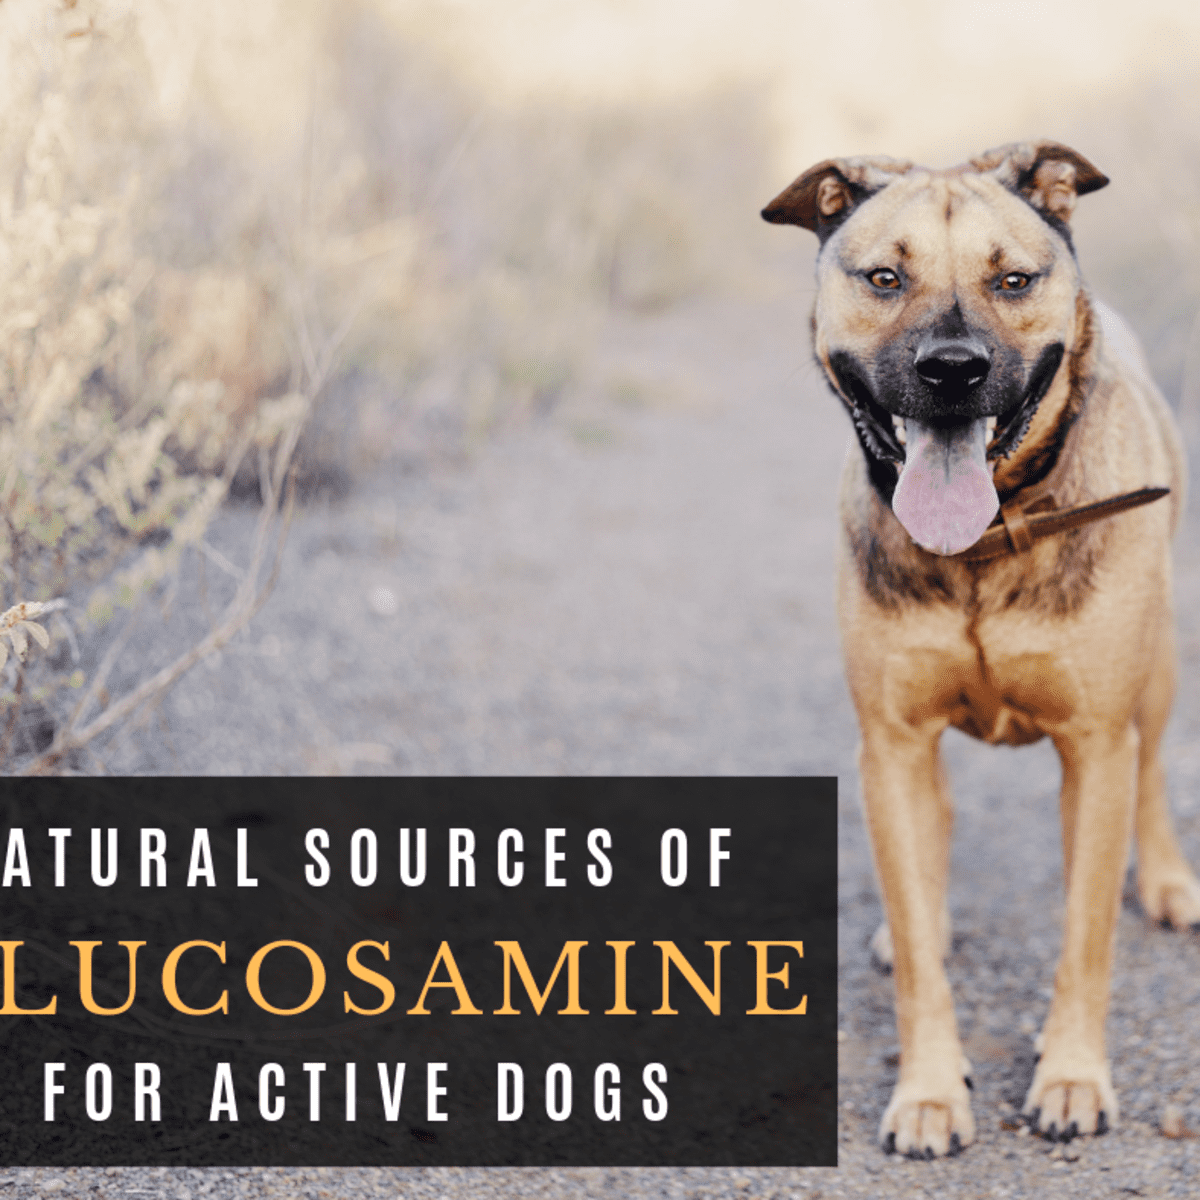 is glucosamine ok for puppies